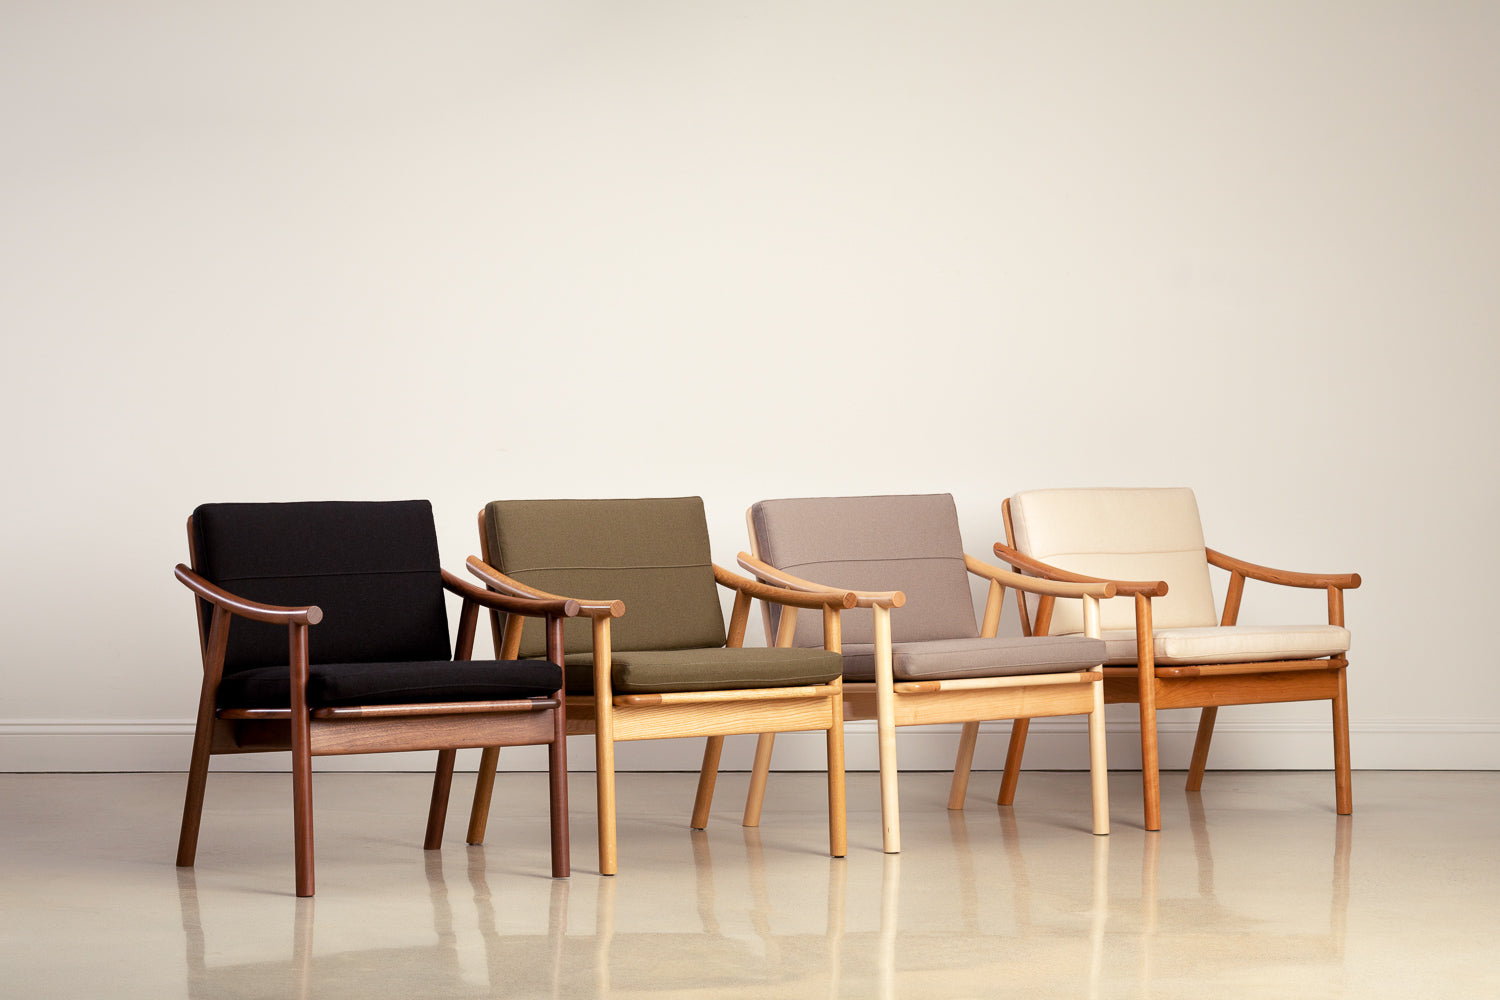 Four Scandinavian style lounge chairs in a row in a rainbow pattern with woods in walnut, oak, maple and cherry